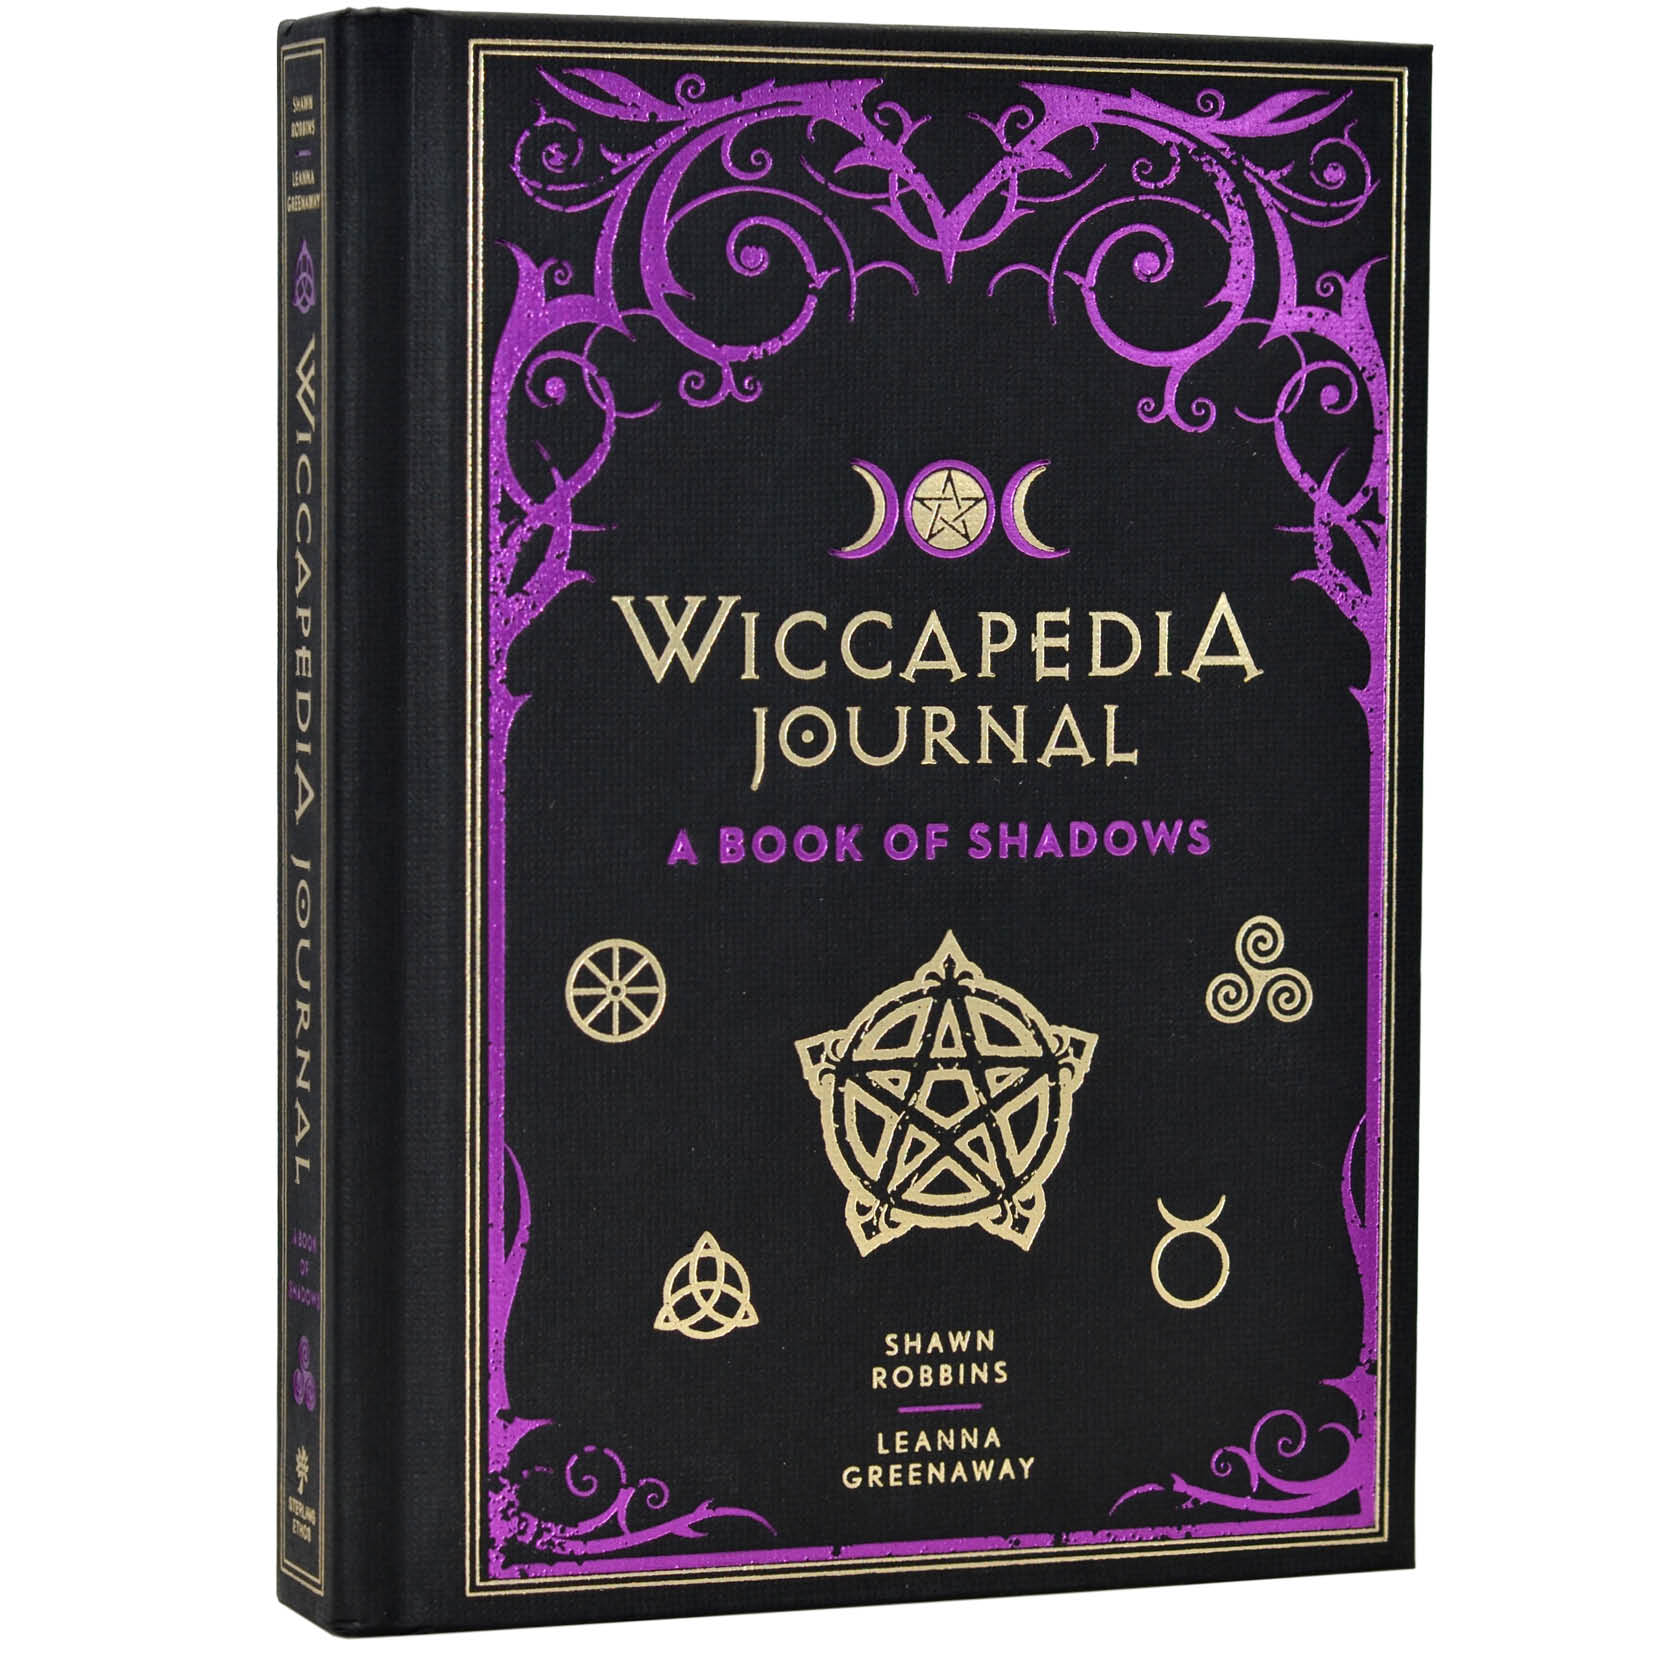 Wiccapedia Journal : A Book of Shadows